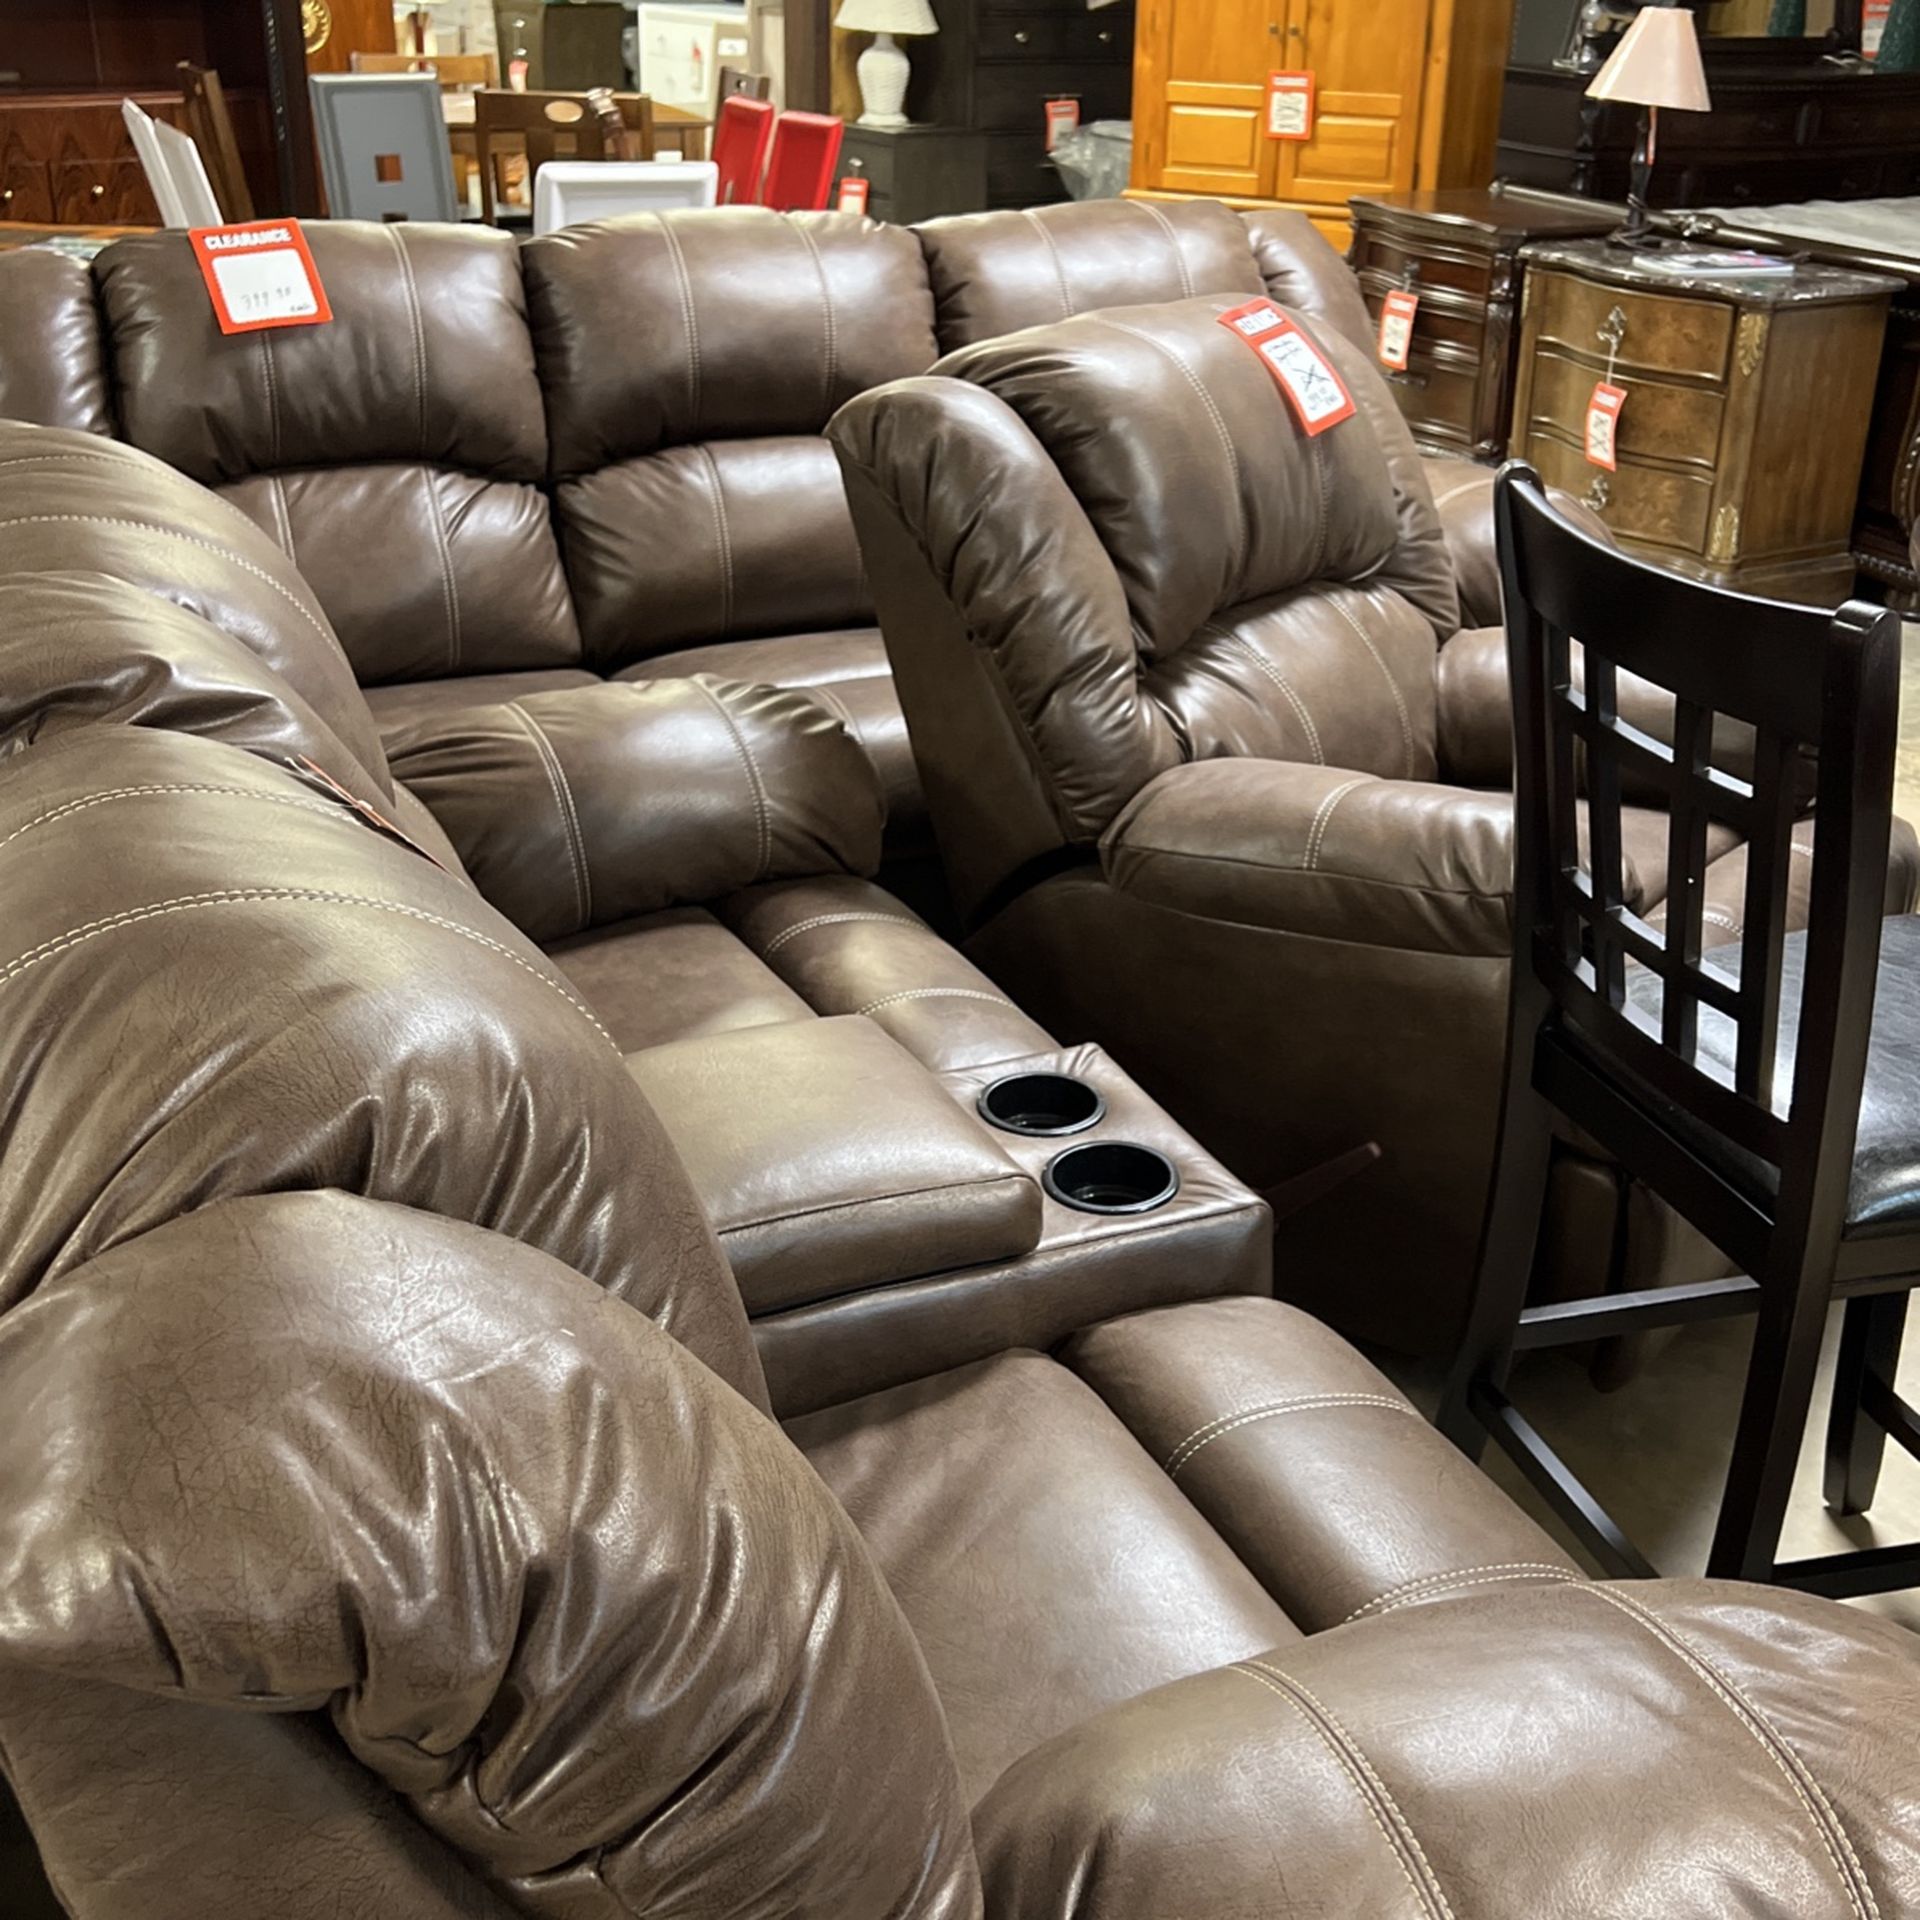 Reclining Couch, 799, reclining loveseat 799, reclining chair, 399 rocks and reclines all brand new grabbing go